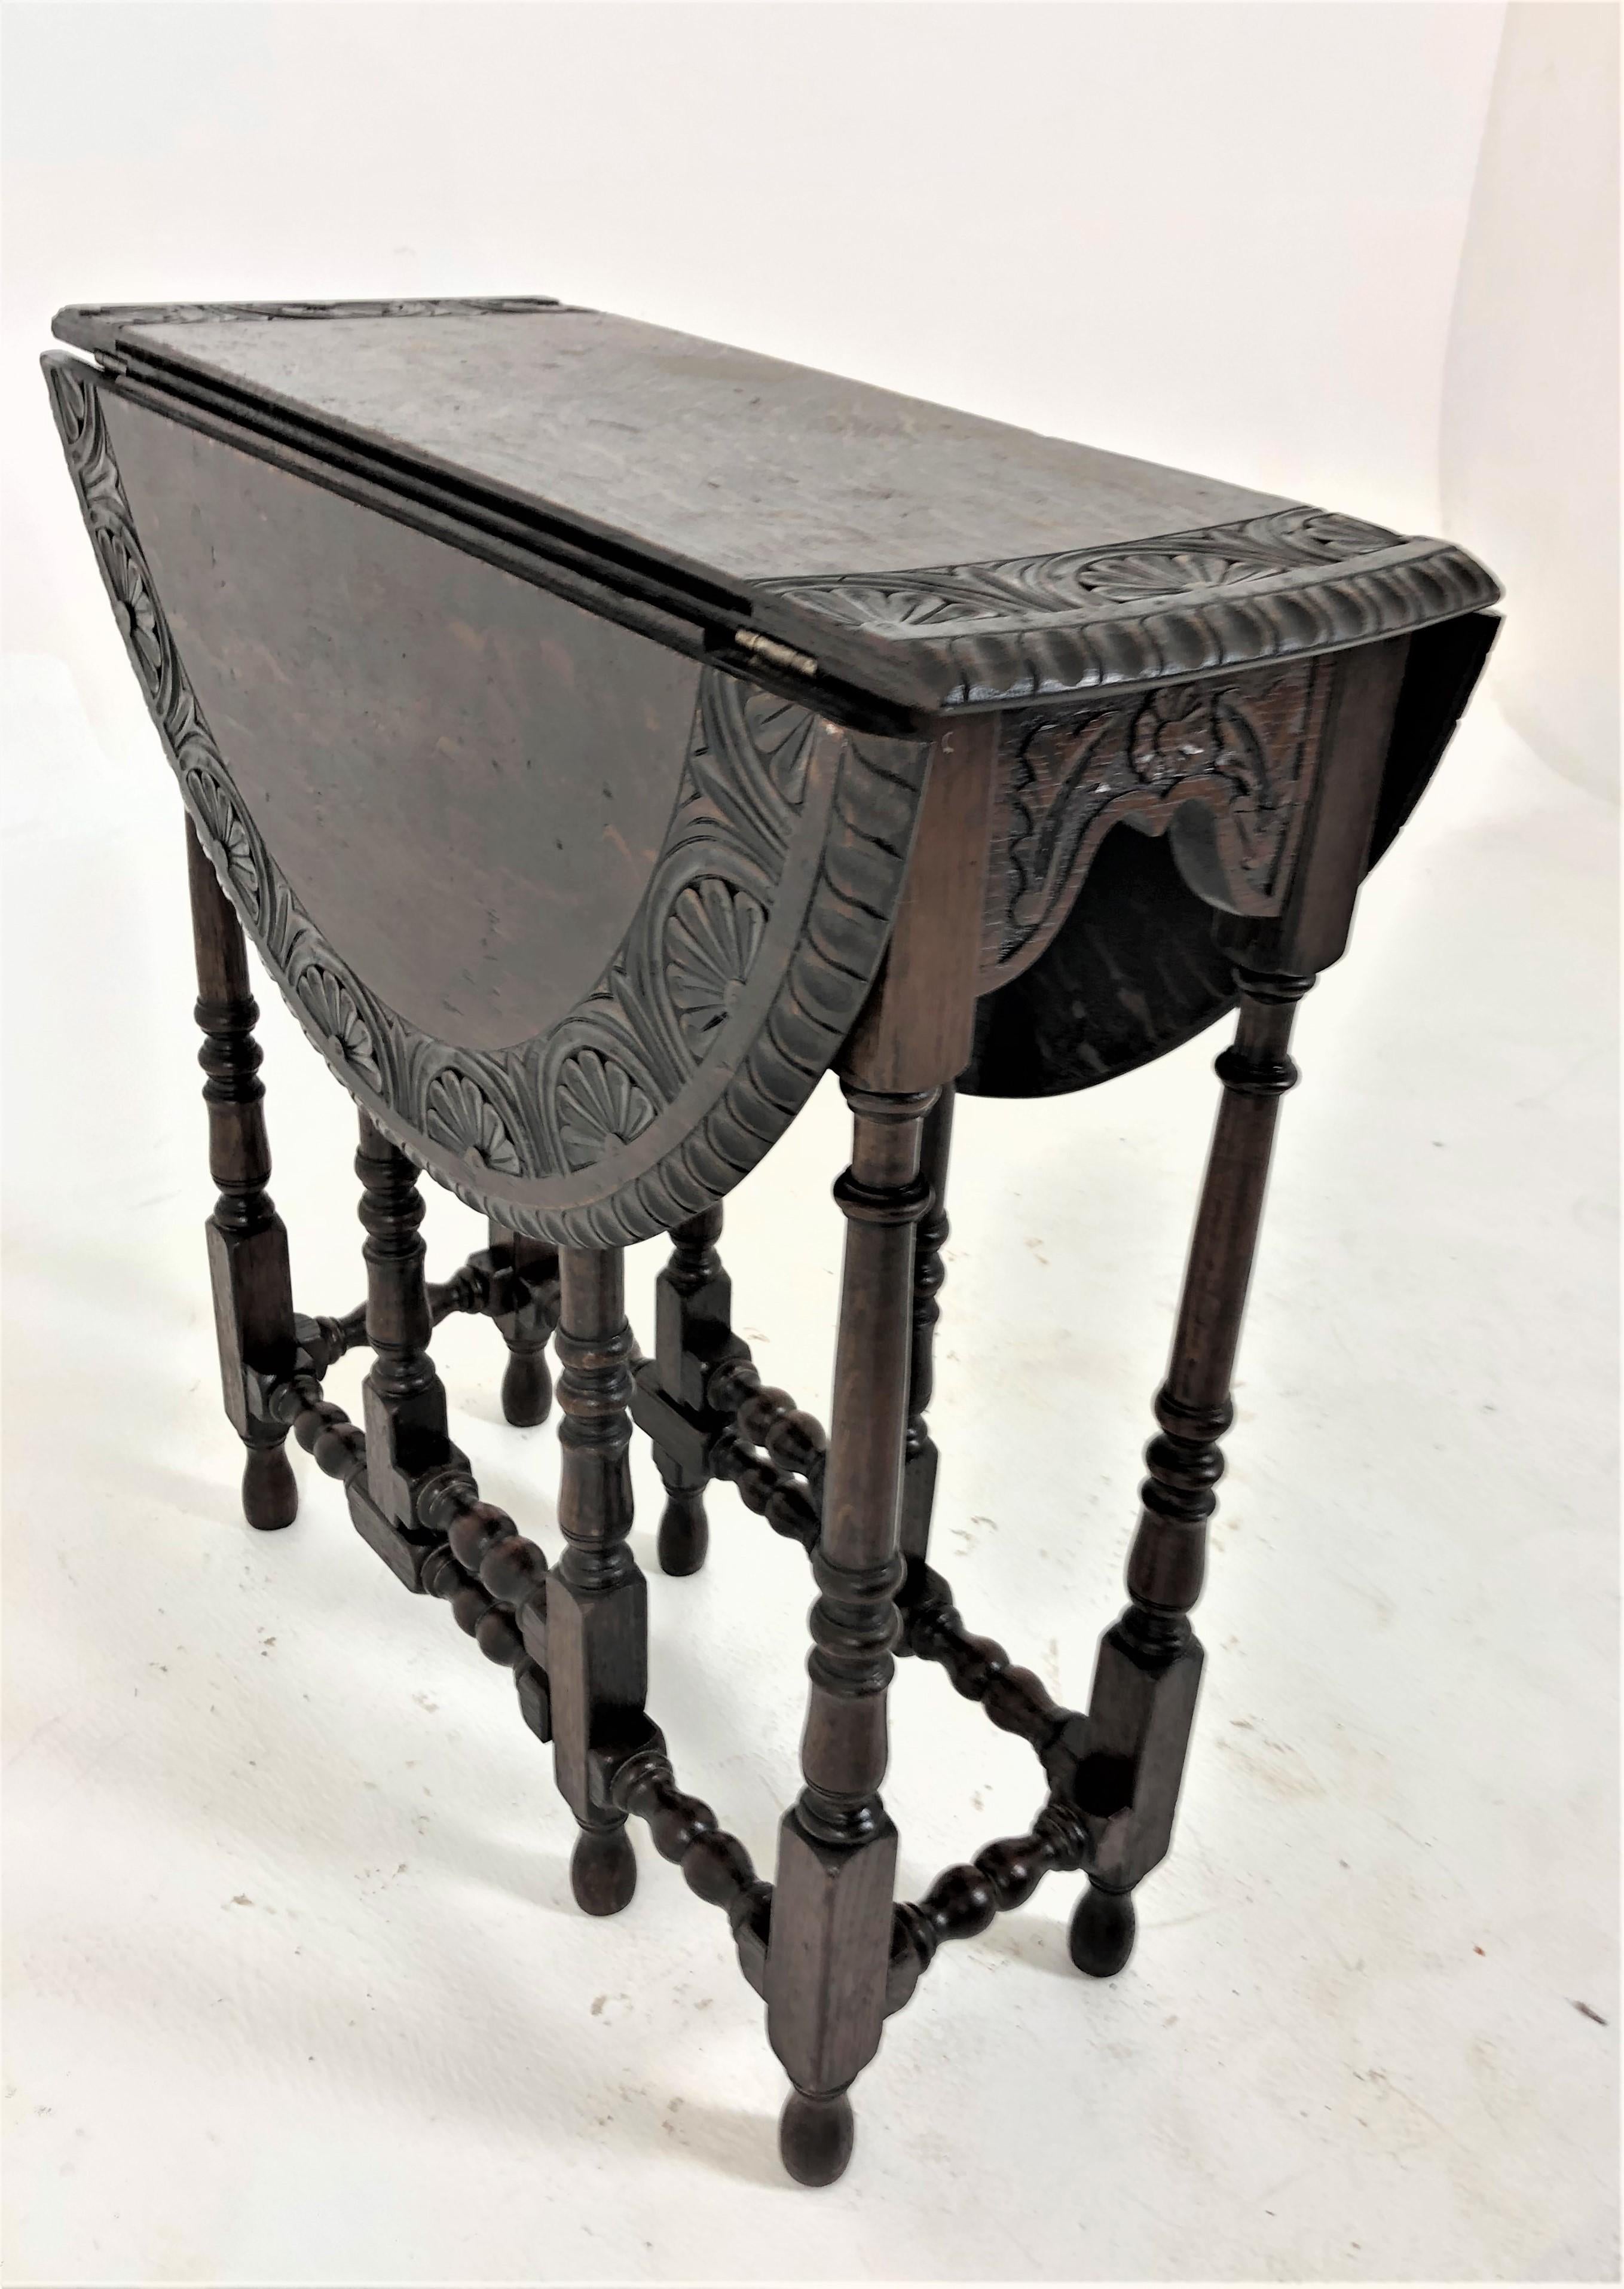 Antique carved tiger oak drop leaf, gateleg table, Scotland 1910, H843

Scotland 1910.
Solid oak.
Original finish.
Carved oak drop leaf table has an oval top.
With carved detail and a scalloped edge.
All supported by turned legs and stretchers